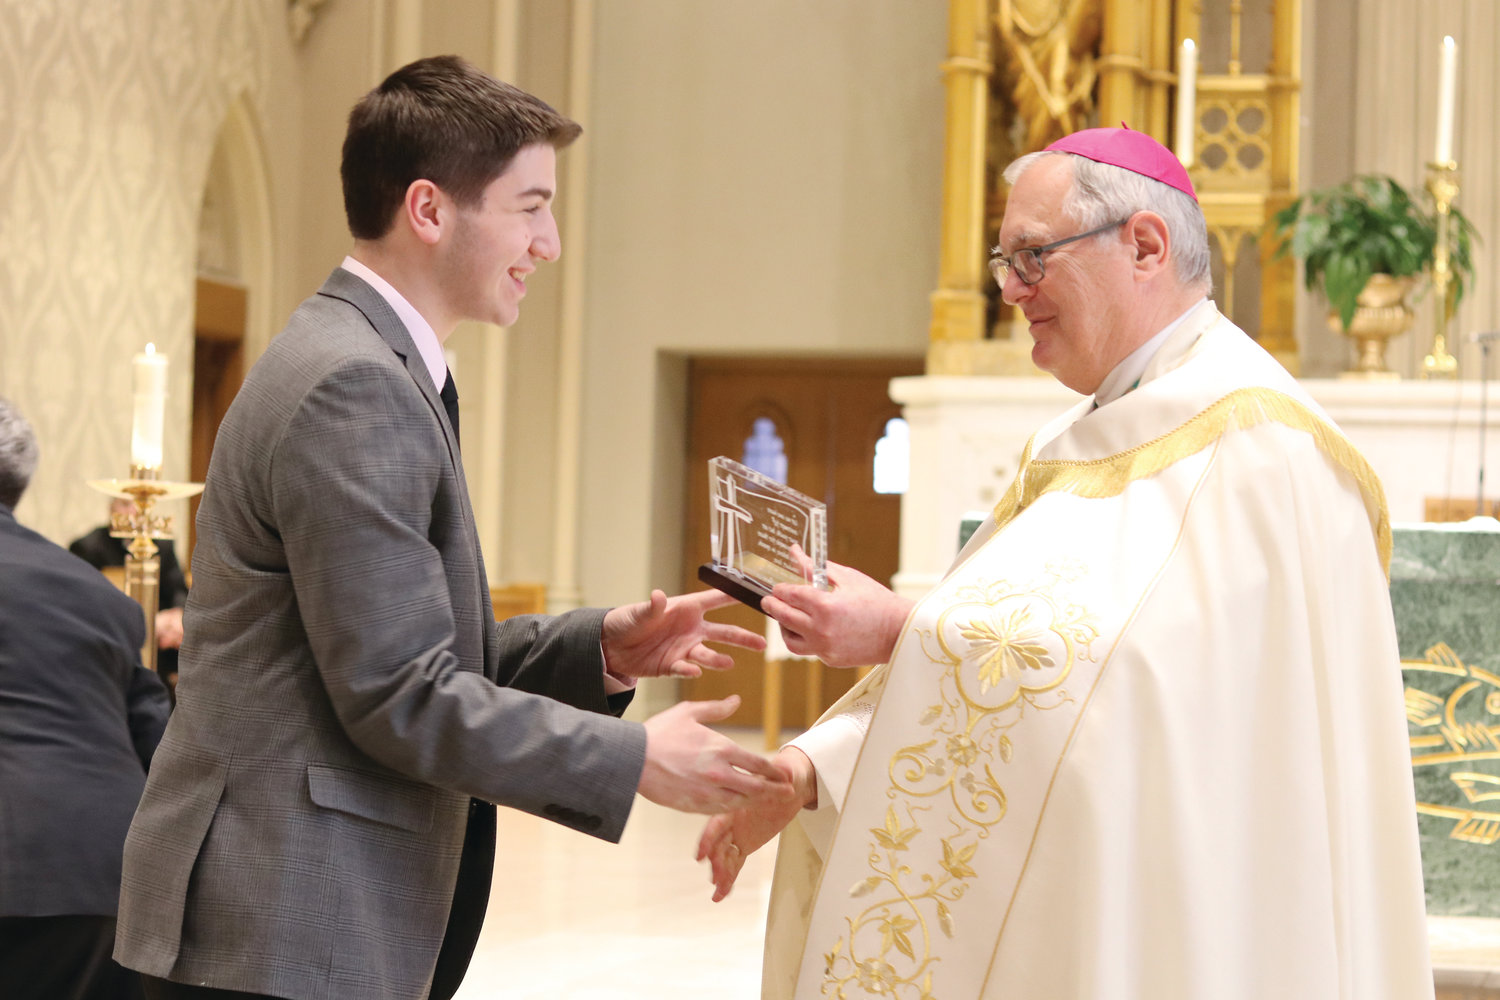 Nicholas Carpentier, of St. Agatha Church, Woonsocket, one of the 23 recipients of the 2019 St. Timothy Award, is congratulated by Bishop Tobin. The St. Timothy Award is a national honor given annually to outstanding juniors and seniors in high school or in their early college years who live as disciples of Christ by witnessing to their faith, demonstrating Gospel values through service to others and exhibiting Christian leadership.